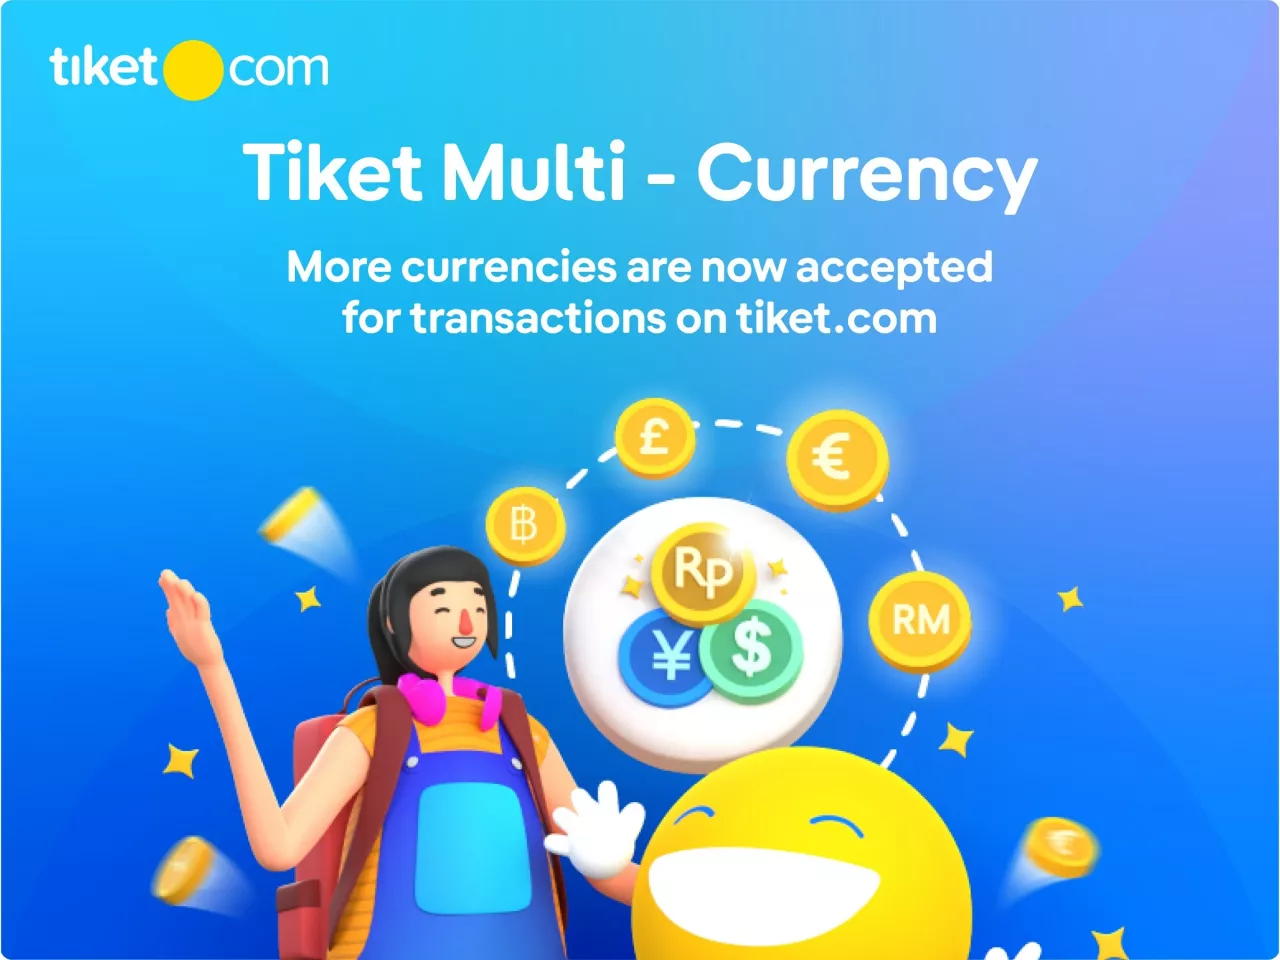 Tiket Multi-Currency can be used for purchases in all tiket.com products such as accommodation, flights, and attractions in tiket To Do. Customers, especially those based overseas, can now configure their home currency through their tiket.com profile settings, which will be instantly displayed in all products, making payments and refunds. img#1